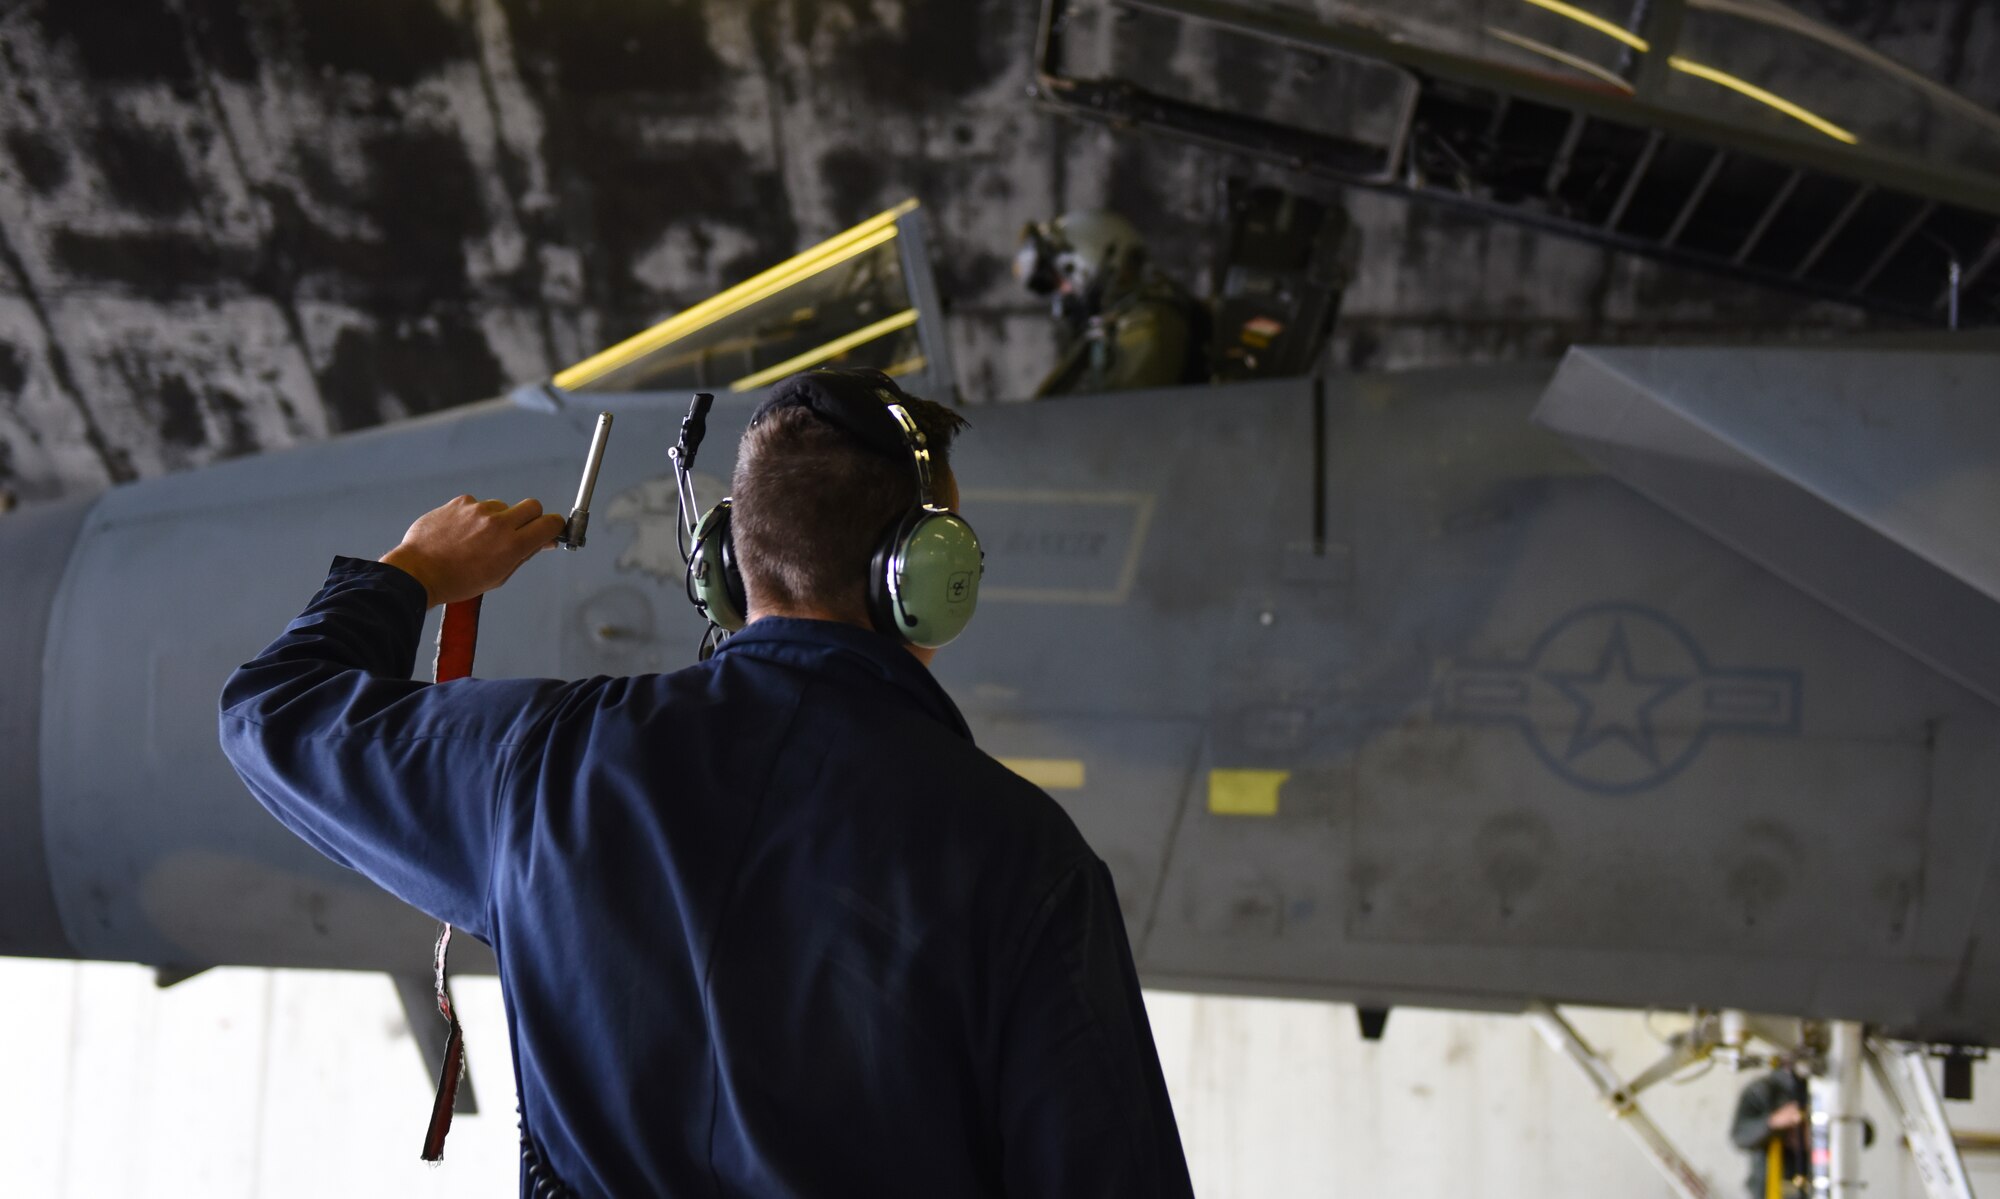 An Airman assigned to the 748th Aircraft Maintenance Squadron prepares an F-15C Eagle for departure at Keflavik Air Base, Iceland, Aug. 2, 2018, in support of NATO’s Icelandic Air Surveillance mission. Deployed from Royal Air Force Lakenheath, England, more than 150 maintainers from the 748th AMXS are facilitating the peacetime preparedness needs and bolstering the security and defense of Iceland. (U.S. Air Force photo/Staff Sgt. Alex Fox Echols III) (U.S. Air Force photo/Staff Sgt. Alex Fox Echols III)